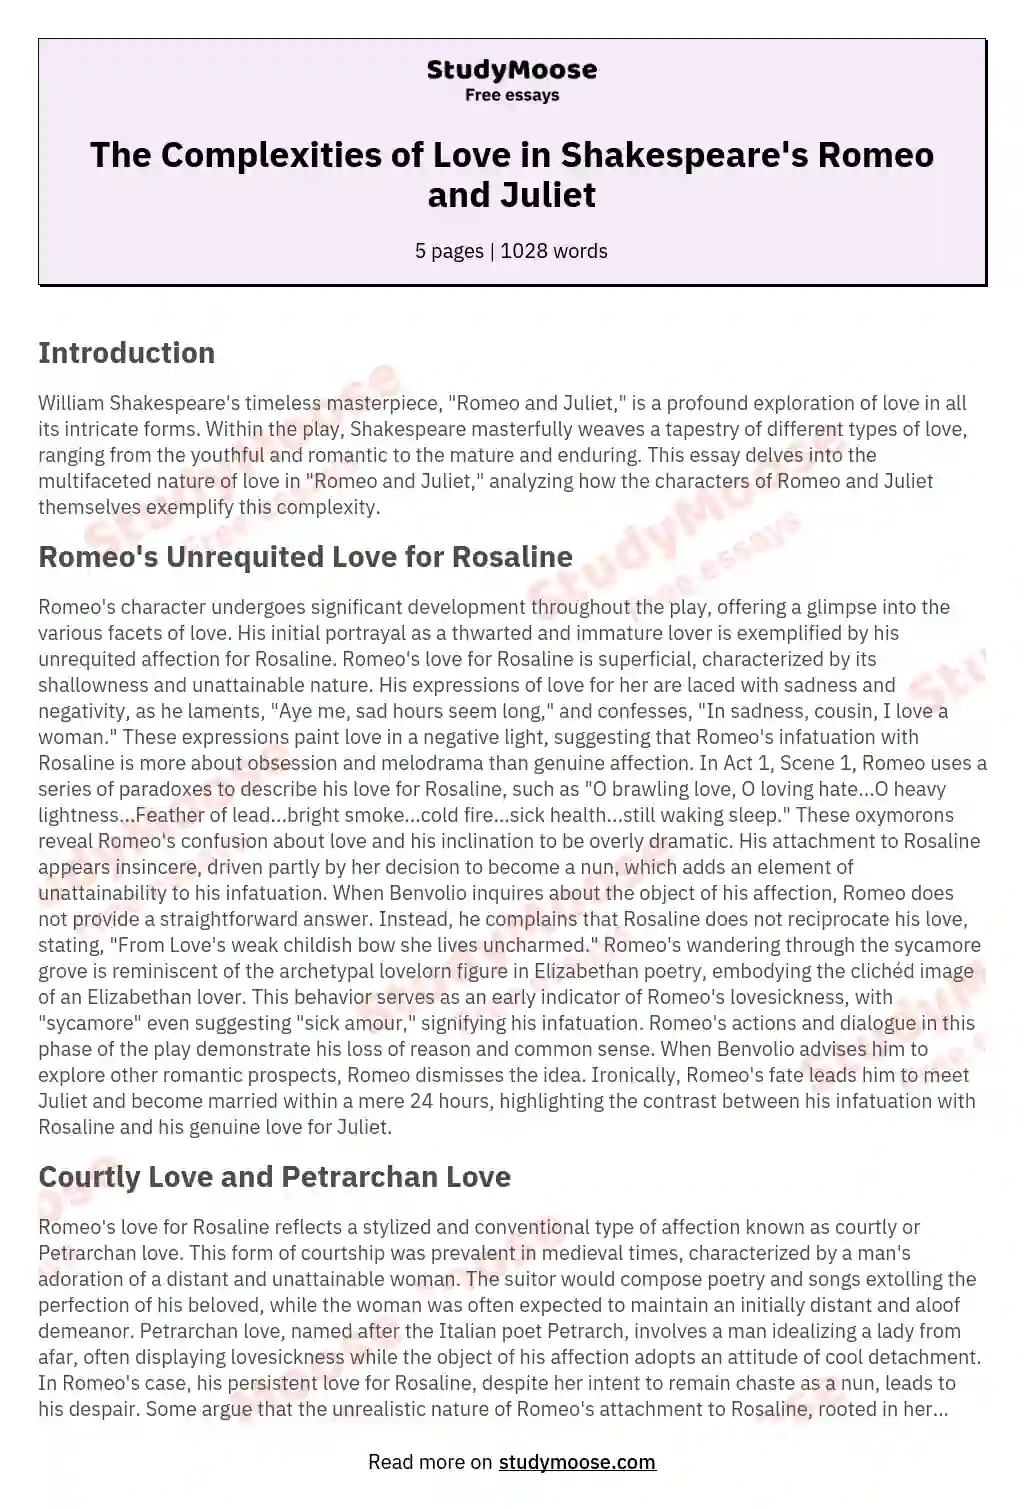 The Complexities of Love in Shakespeare's Romeo and Juliet essay